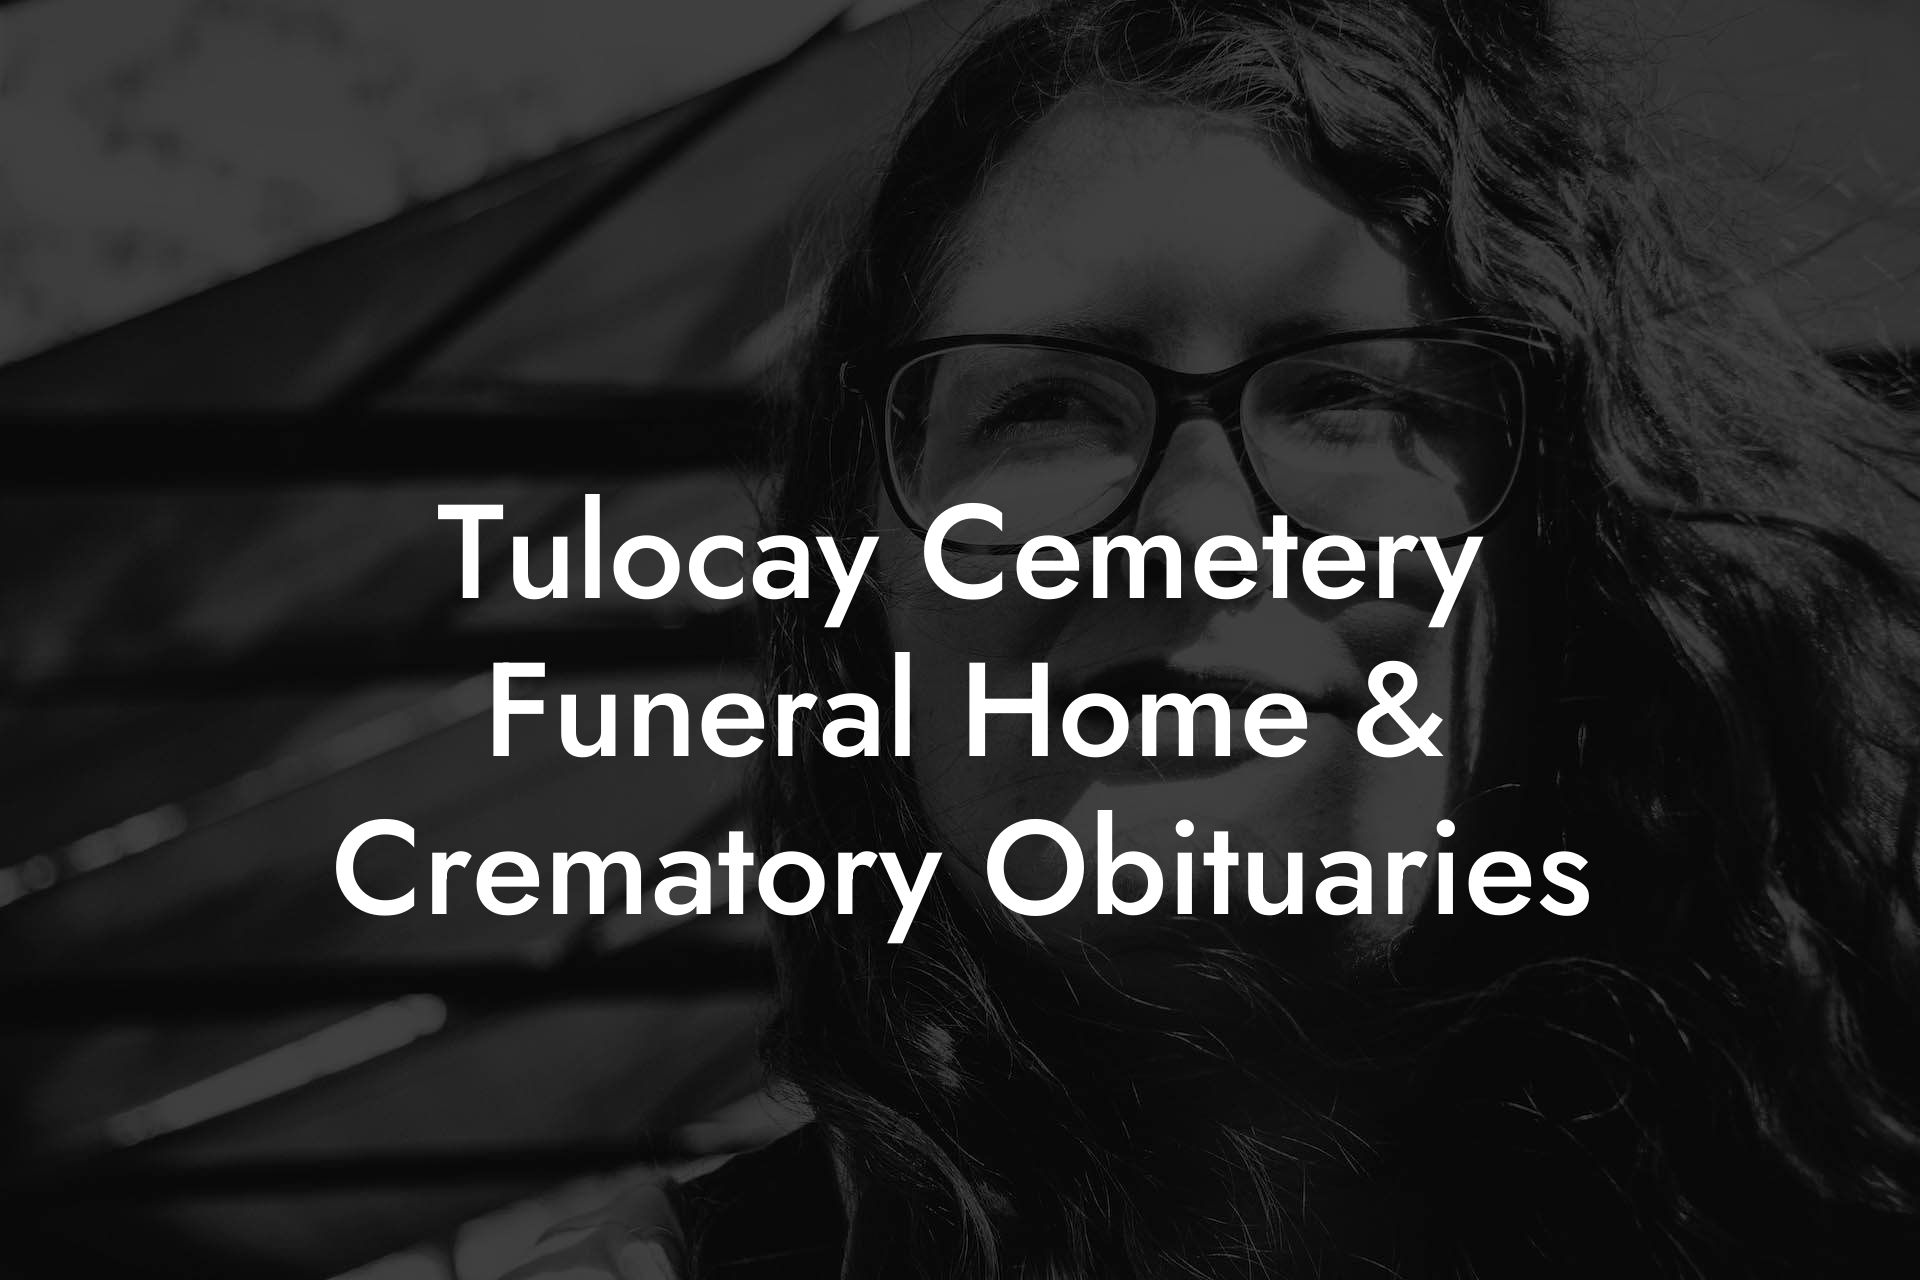 Tulocay Cemetery Funeral Home & Crematory Obituaries